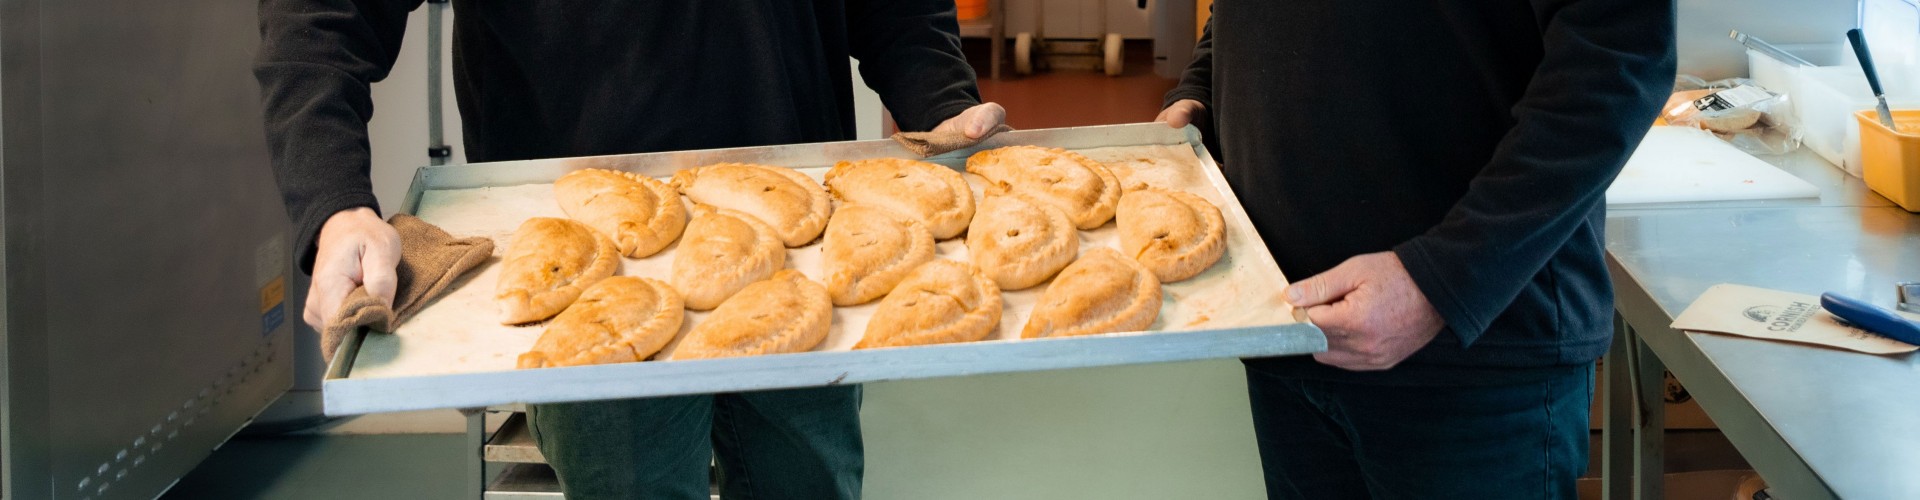 A tray of pasties